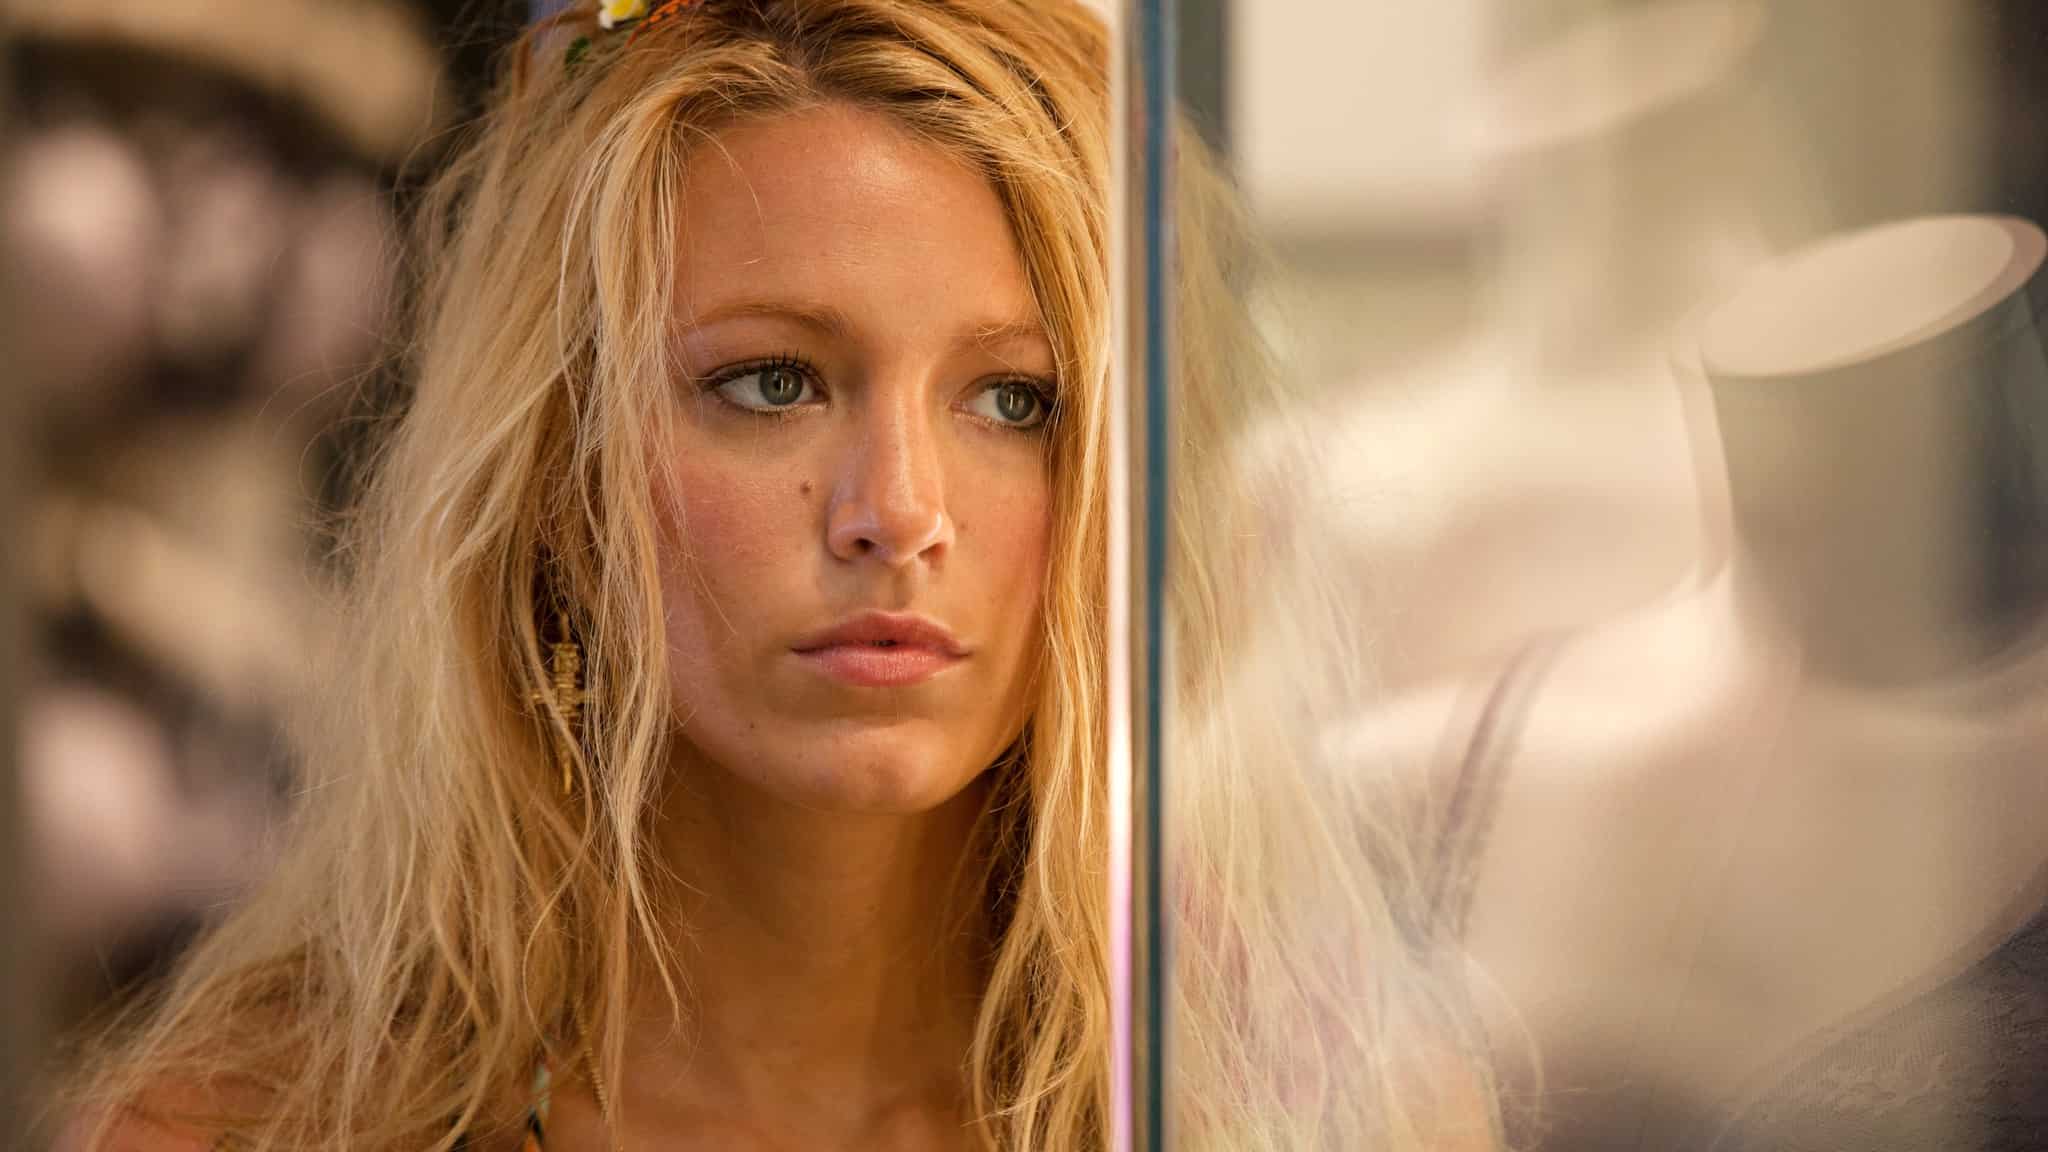 bradley herselman recommends blake lively sexy scene pic